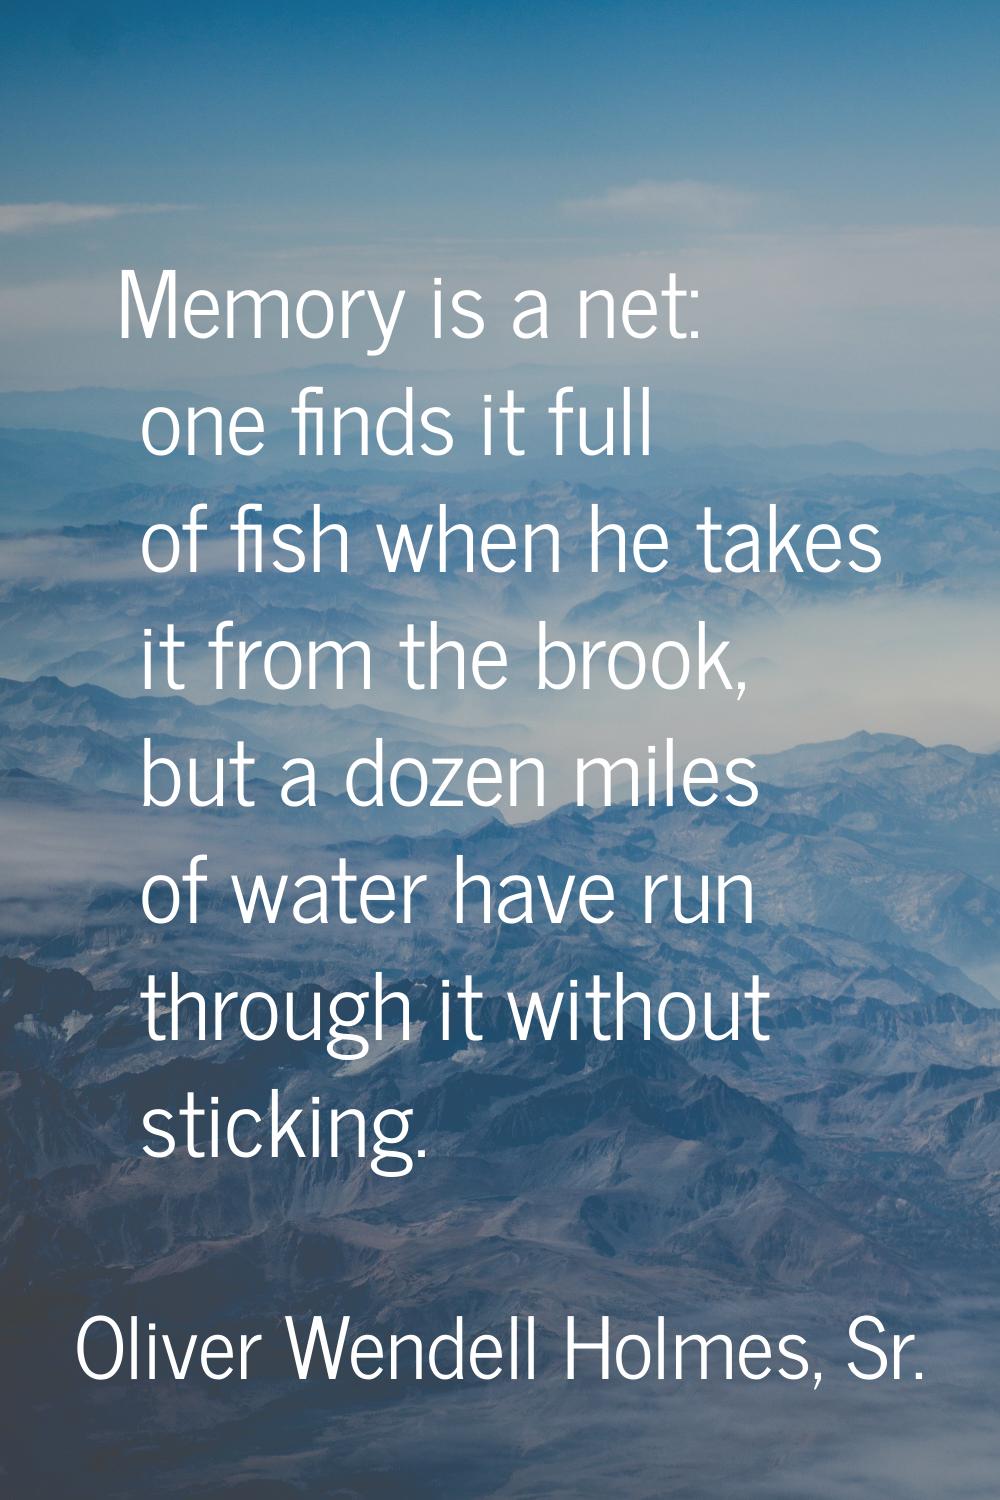 Memory is a net: one finds it full of fish when he takes it from the brook, but a dozen miles of wa